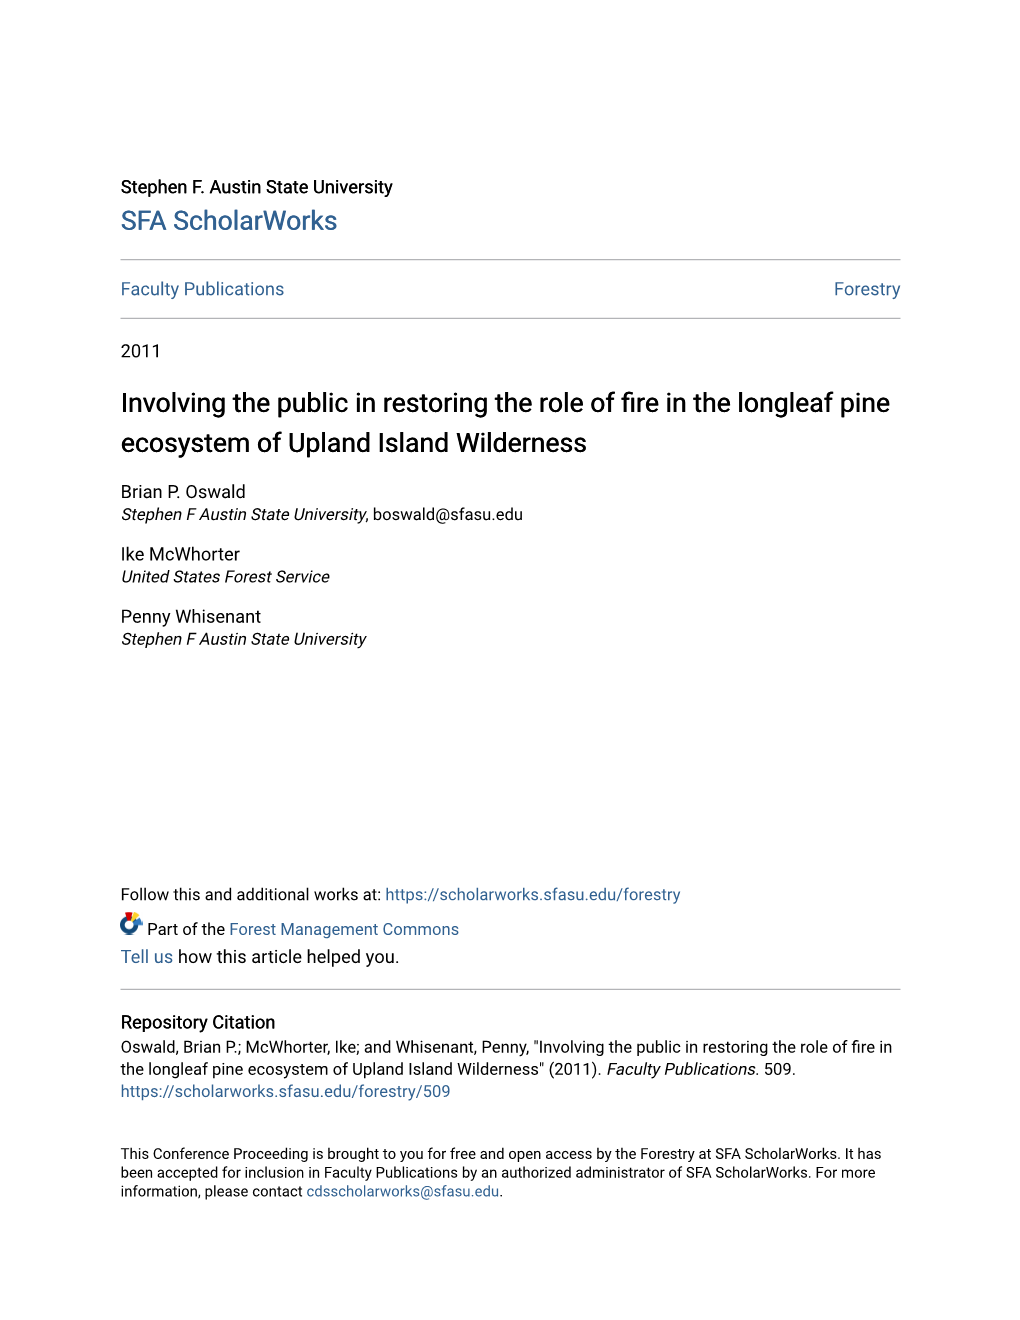 Involving the Public in Restoring the Role of Fire in the Longleaf Pine Ecosystem of Upland Island Wilderness